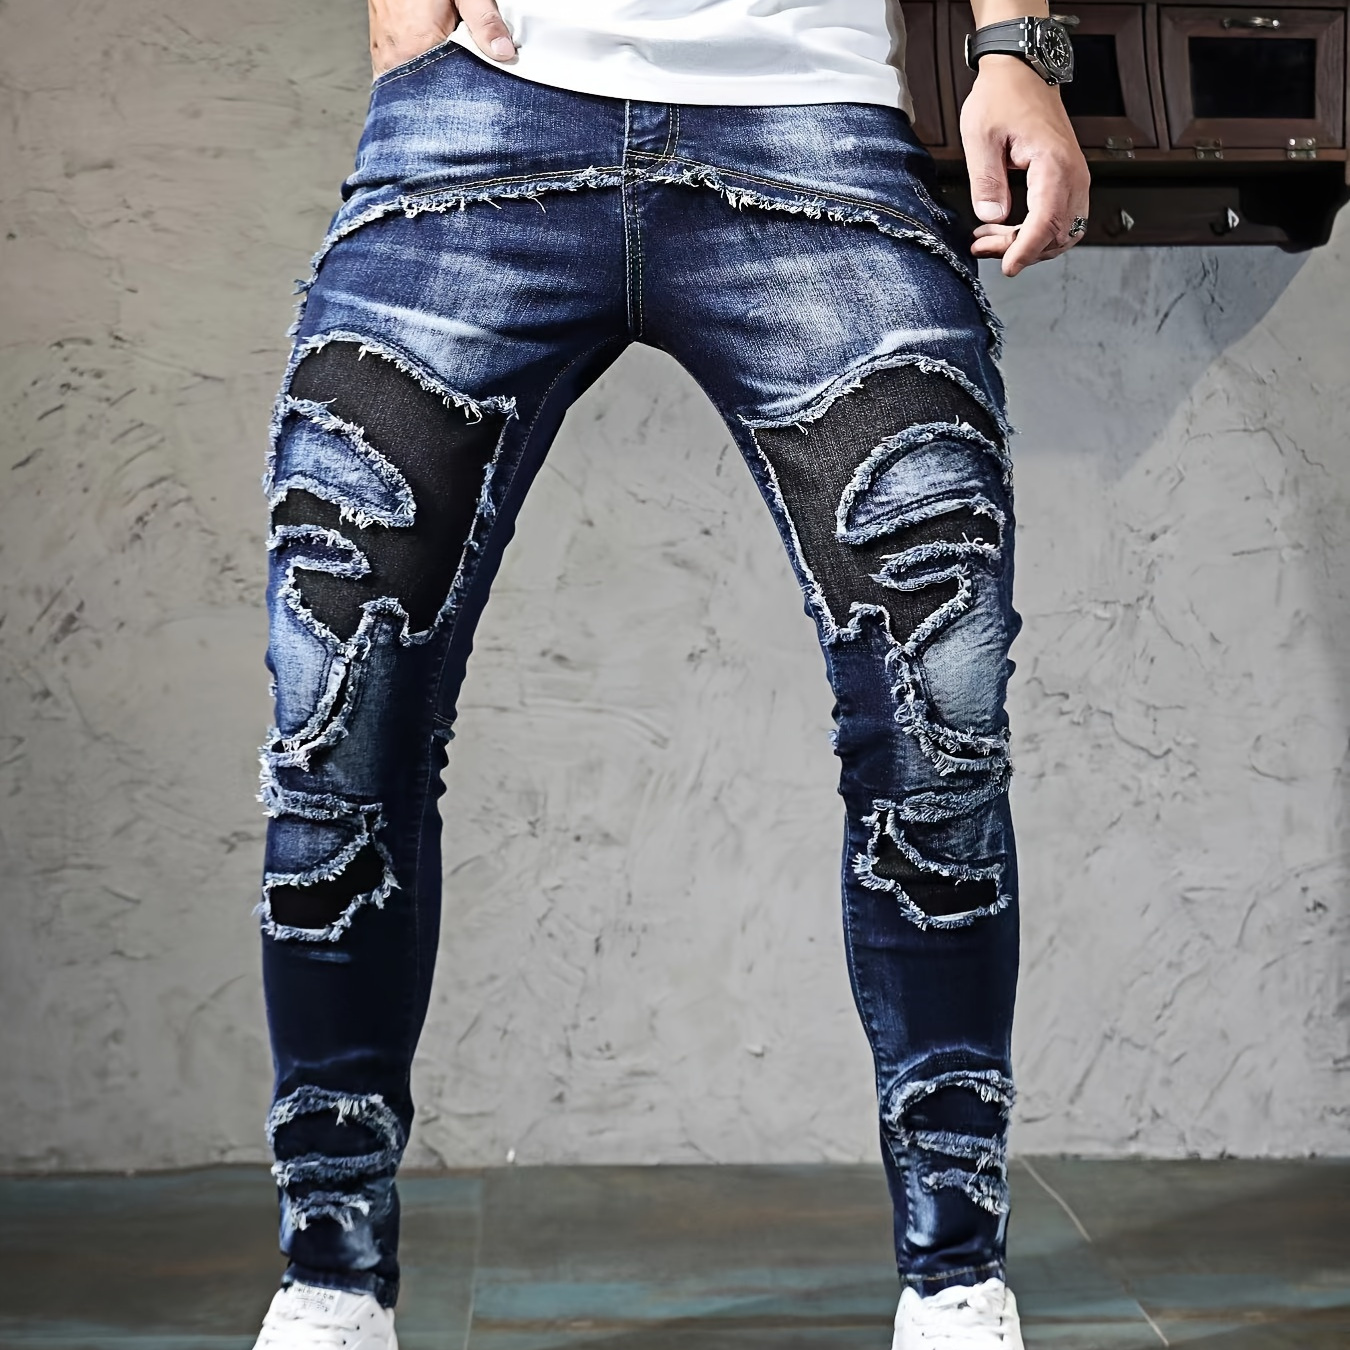 

Men's Skinny Fit Cuffed Denim Jeans With Ripped Pieces And Raw Hem, Stylish And Novel Jeans For Street Wear